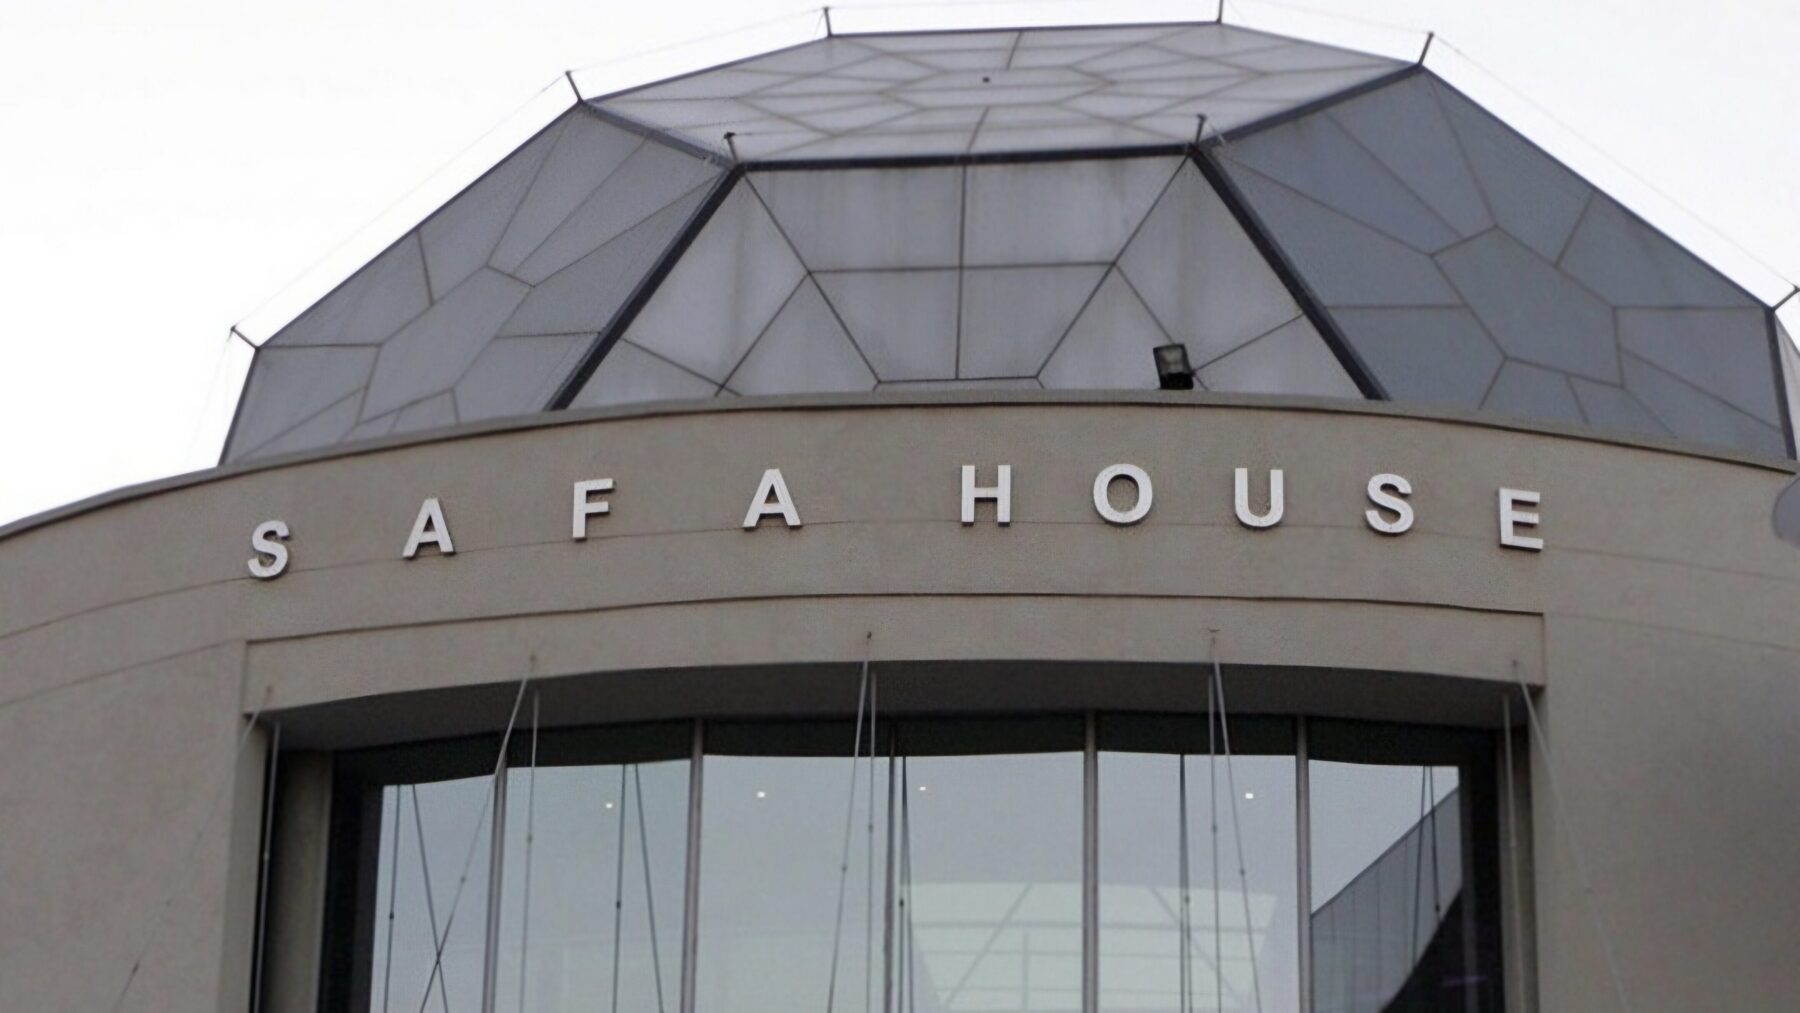 Three SAFA match officials suspended for soliciting bribes 